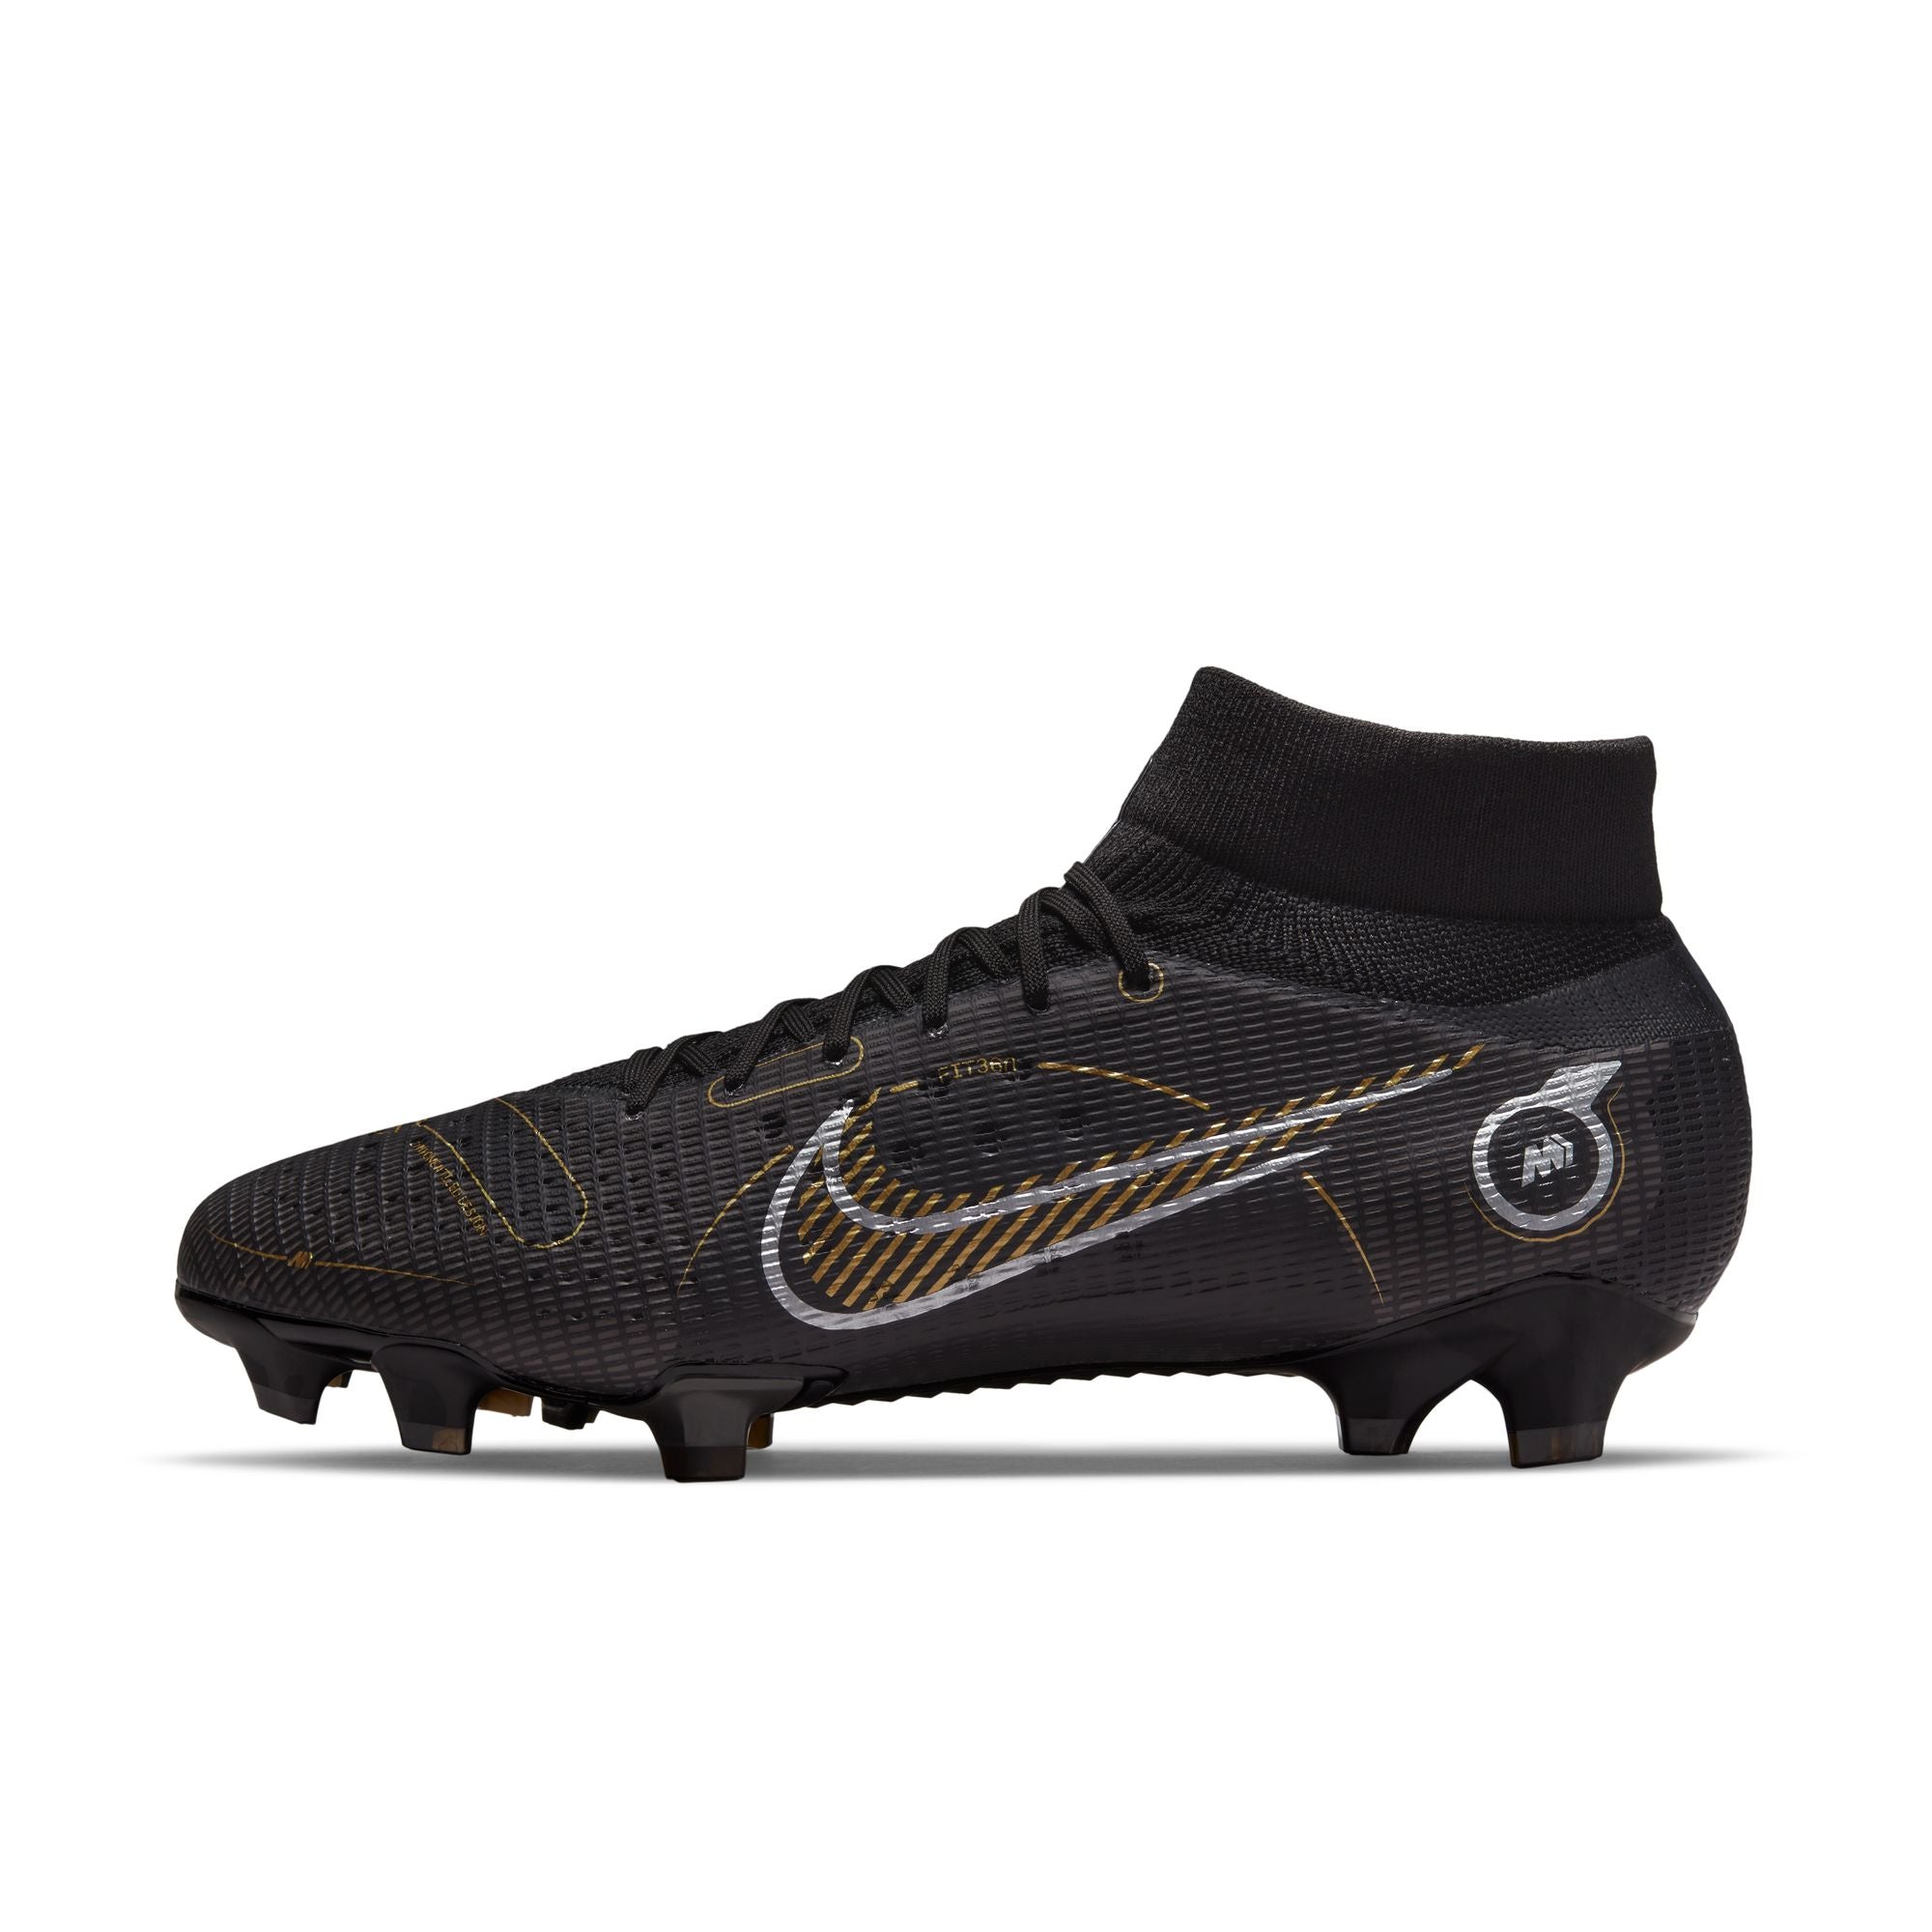 Nike Mercurial Superfly Pro FG Firm-Ground Cleats